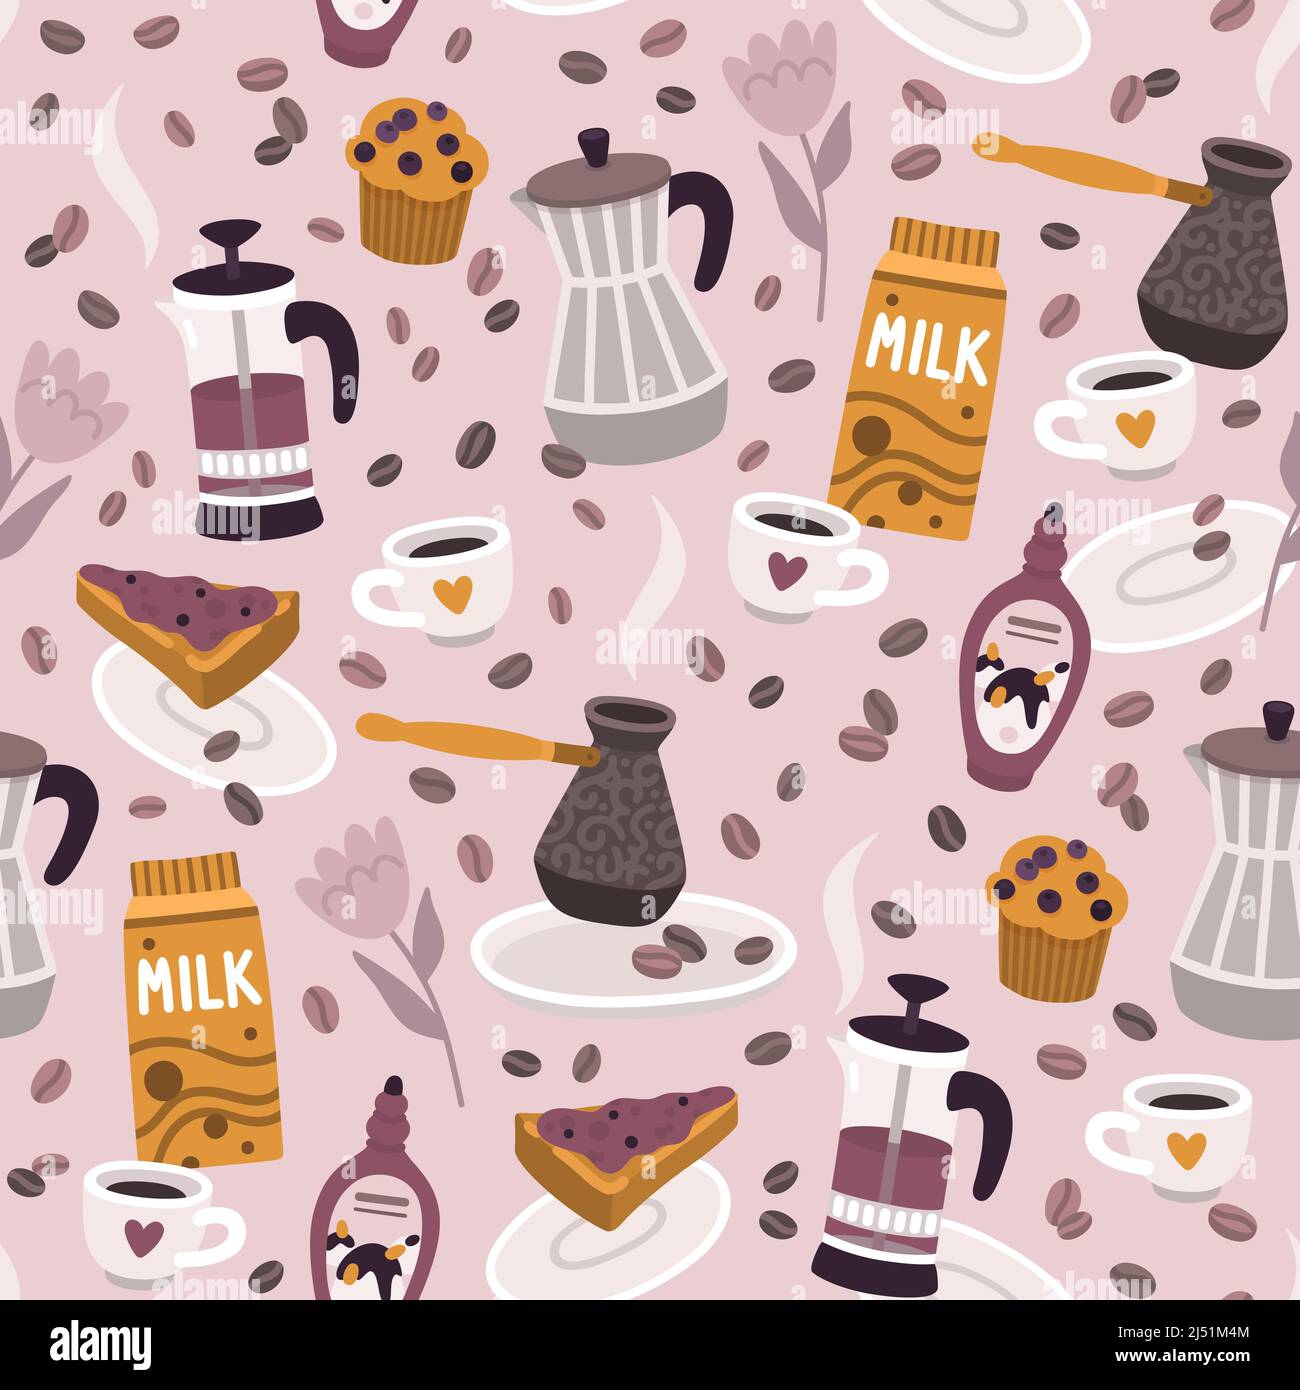 Coffee accessories pattern Stock Vector